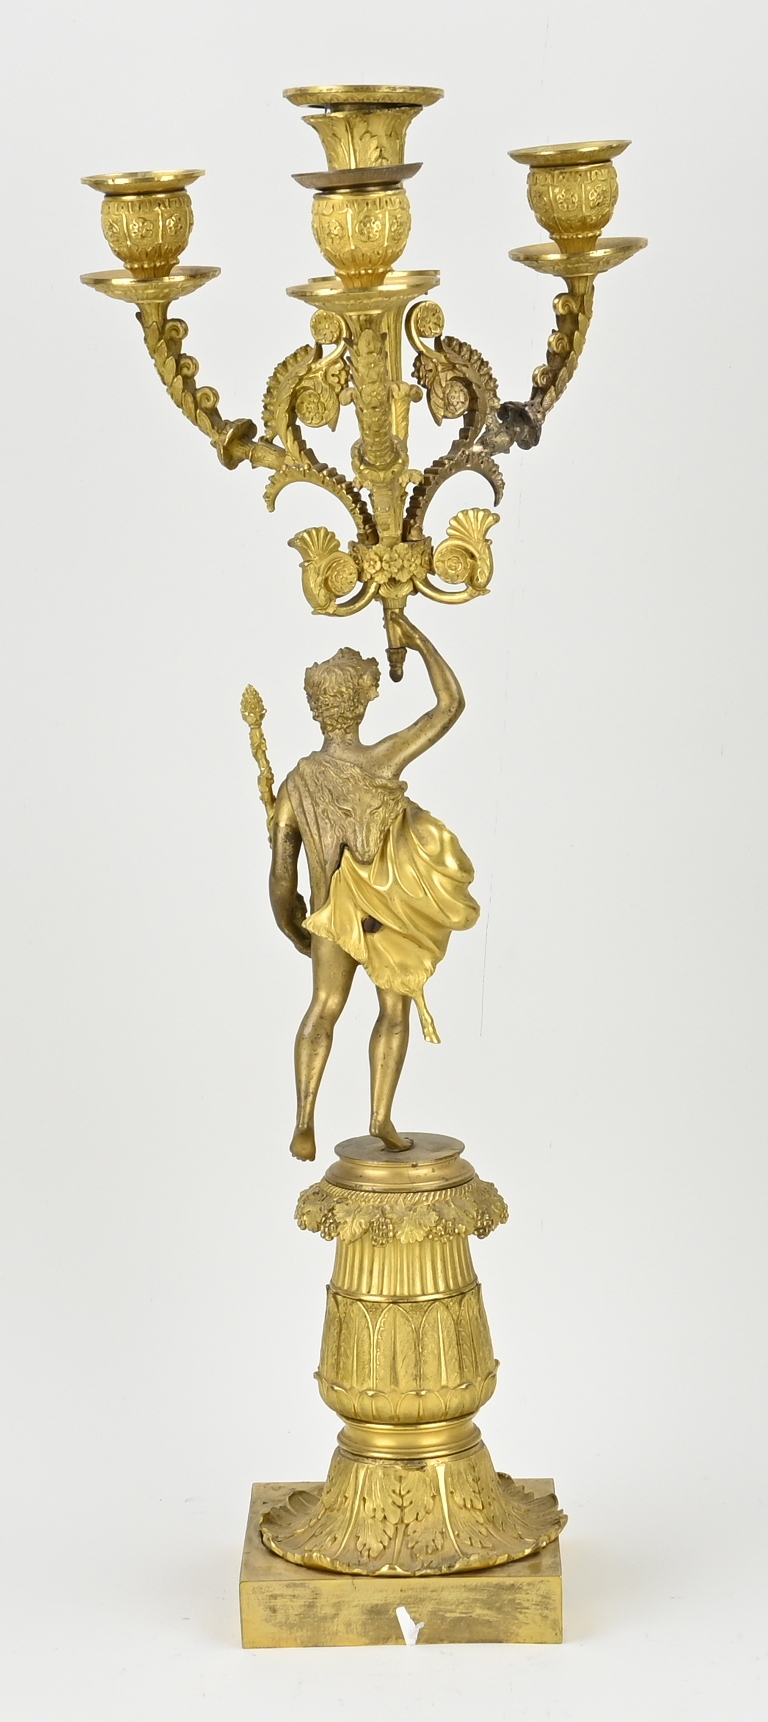 Large French Empire candlestick, H 57 cm. - Image 2 of 3